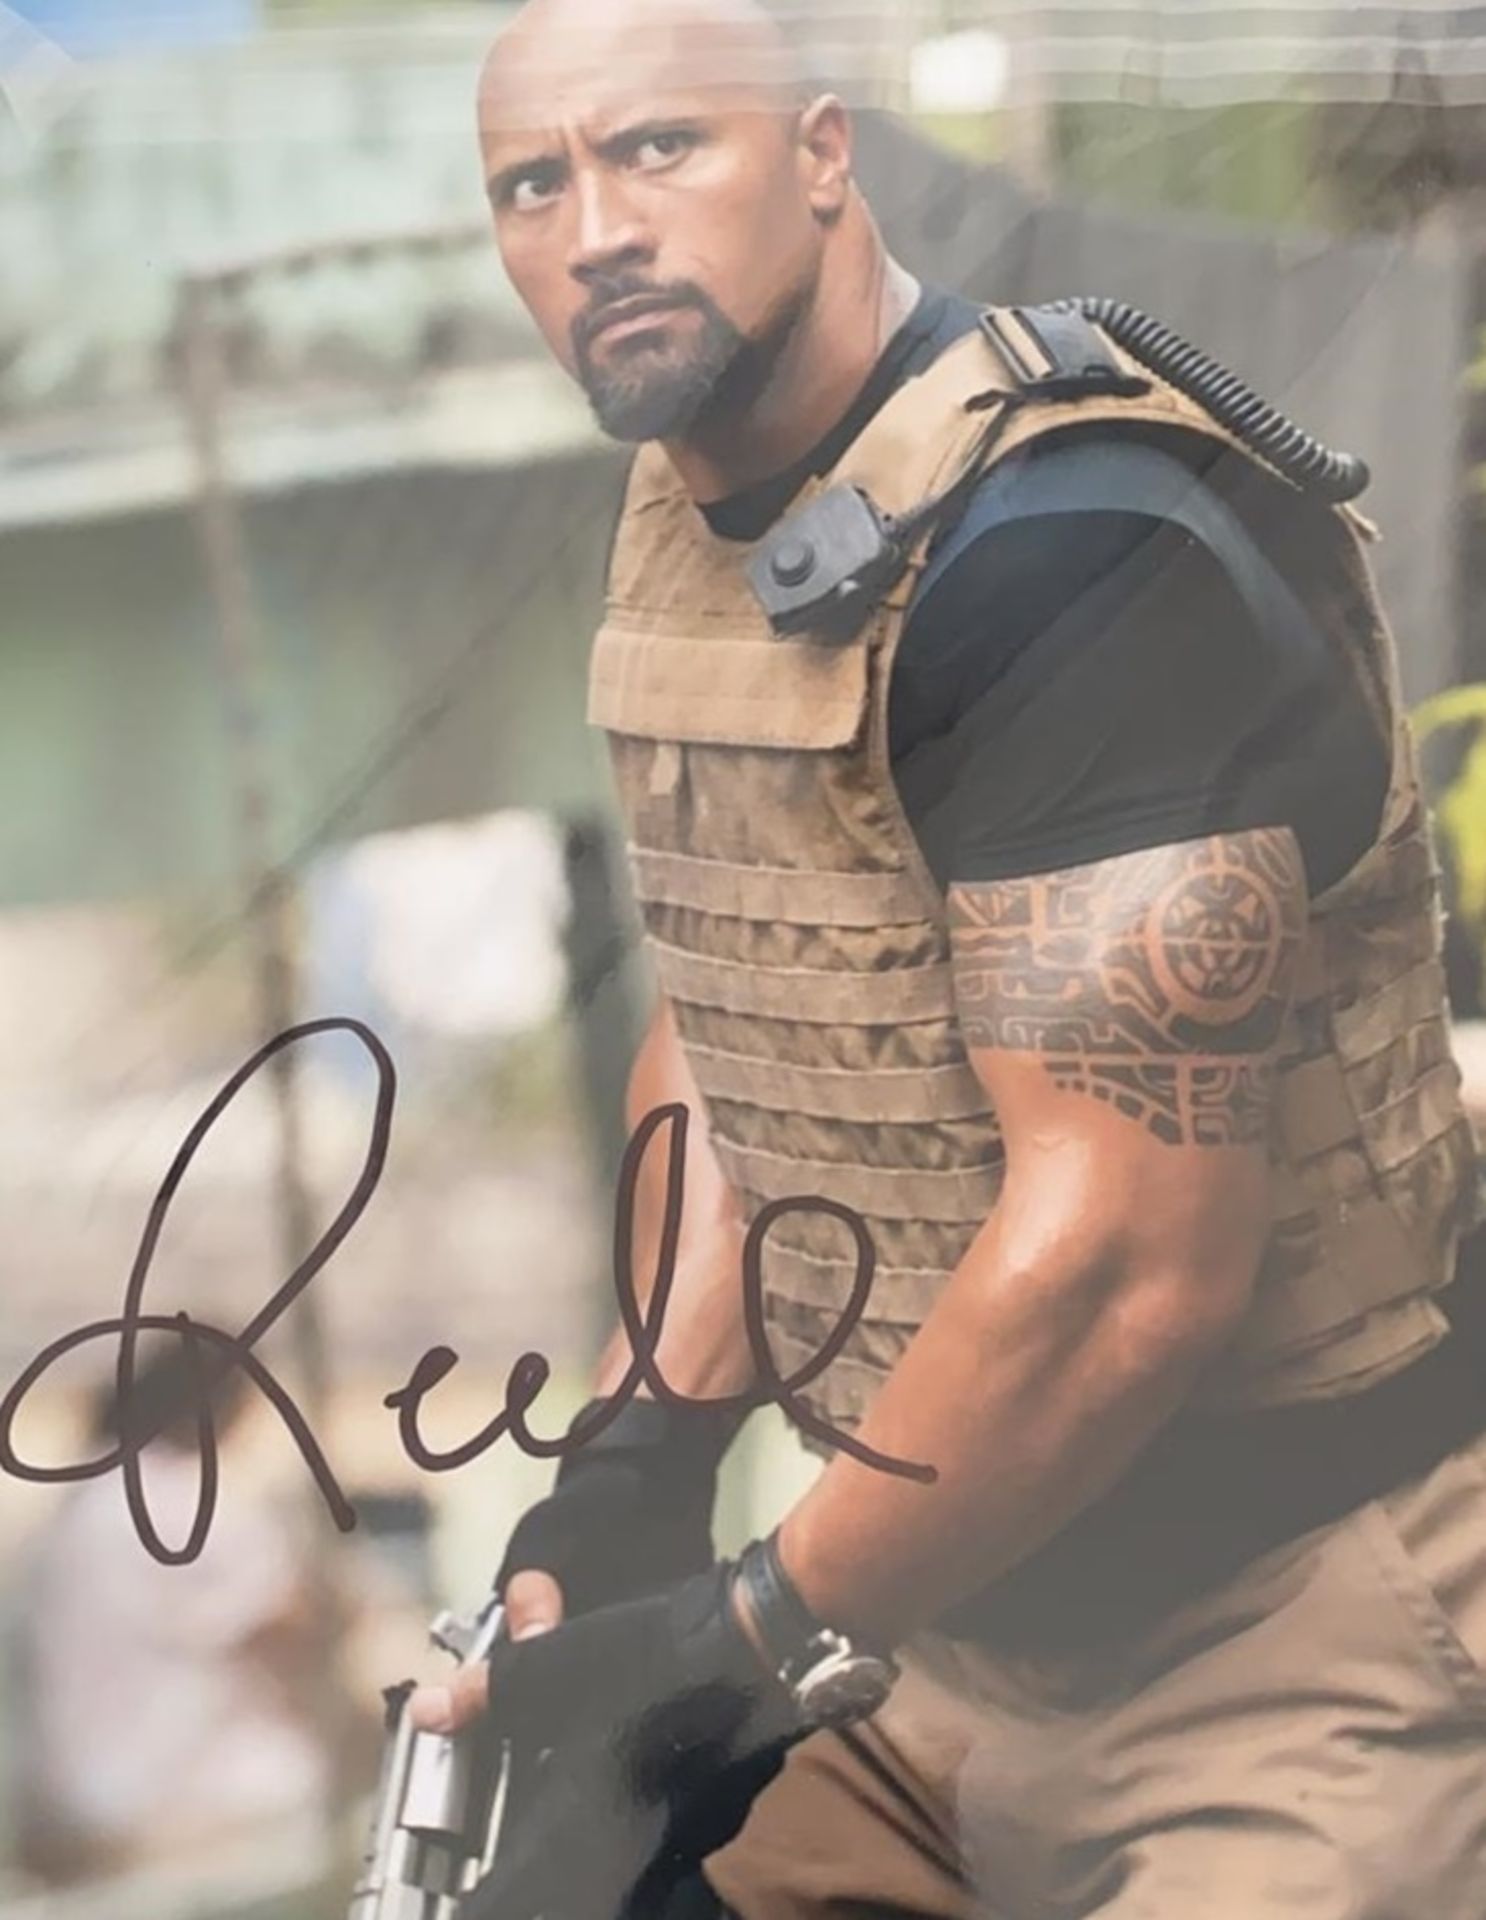 1 x Signed Autograph Picture - DWAYNE JOHNSON - With COA - Size 12 x 8 Inch - CL590 - Location: